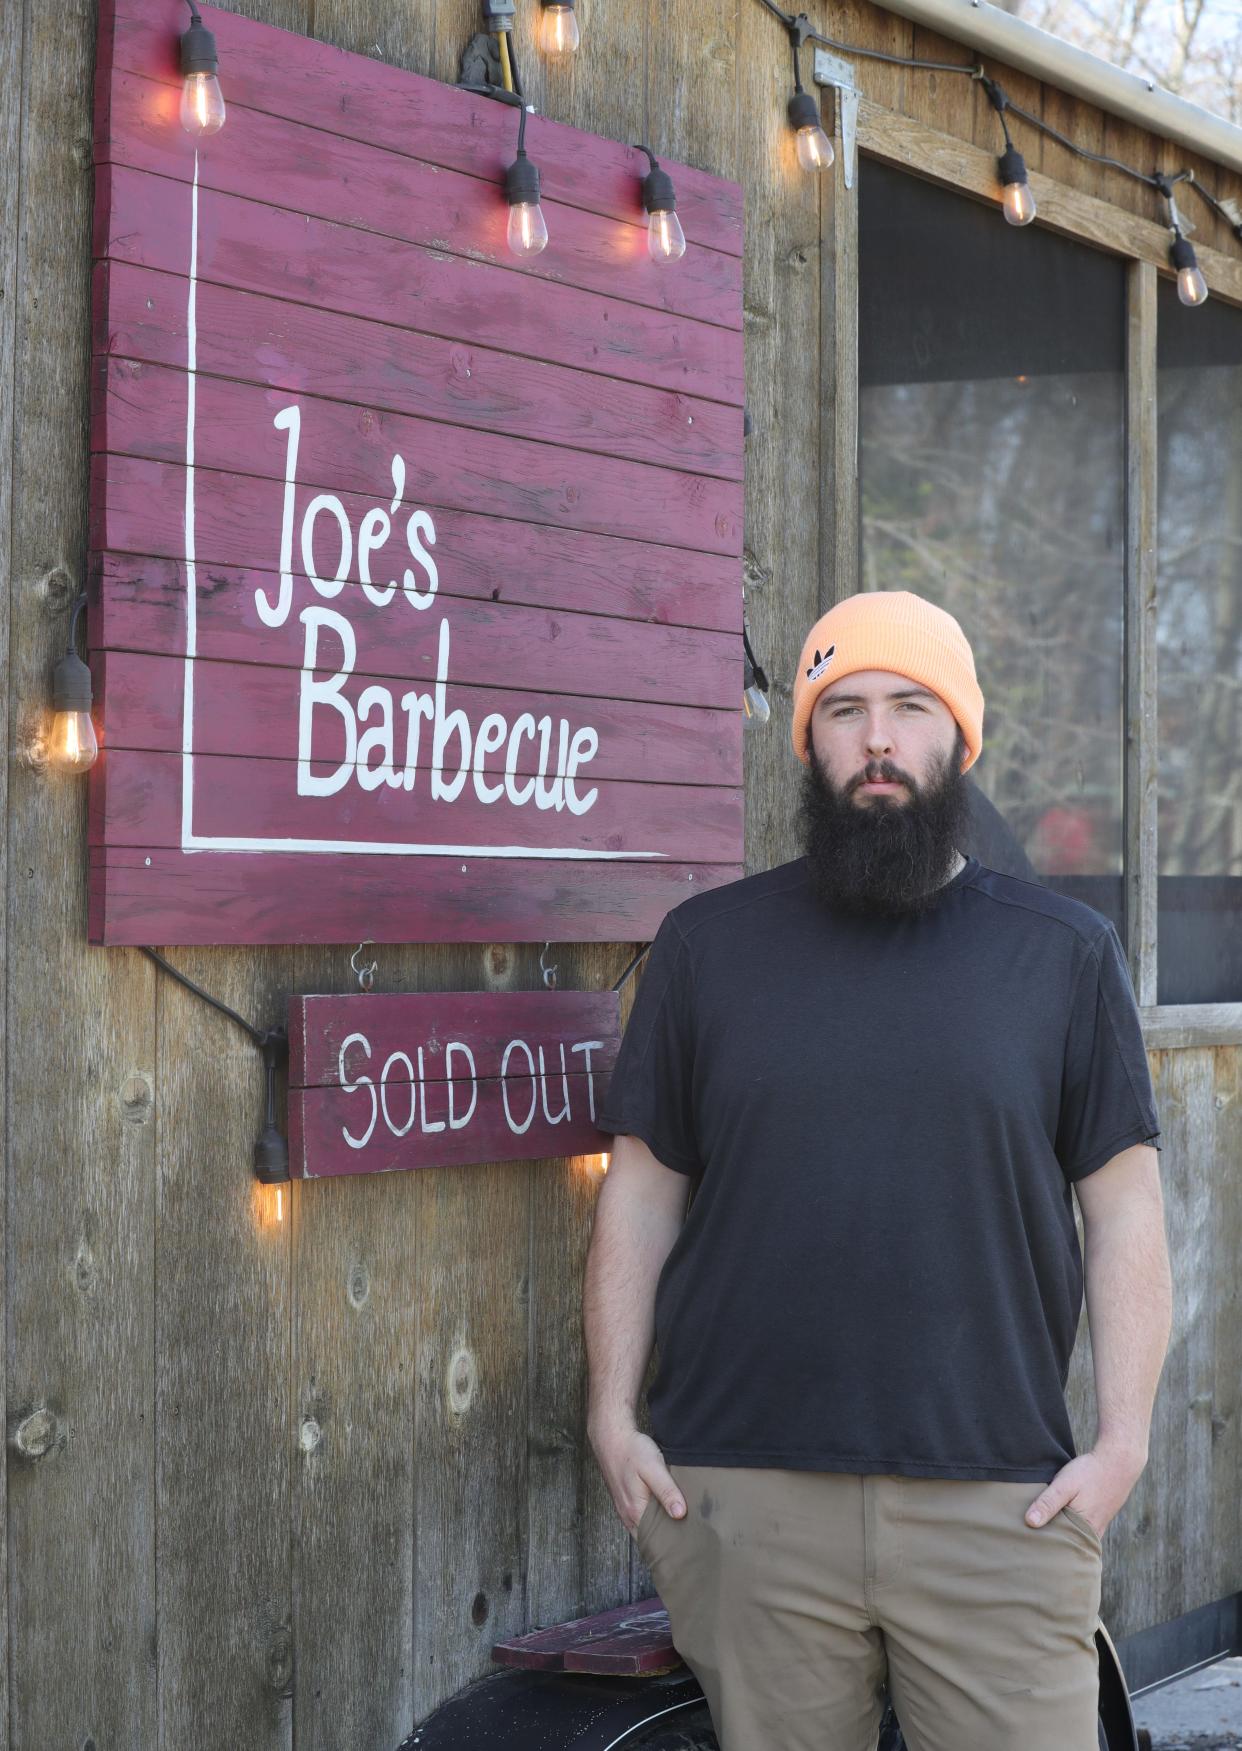 Joe Menendez, owner of Joe's Barbecue, stands outside his food truck business in Brimfield Township.